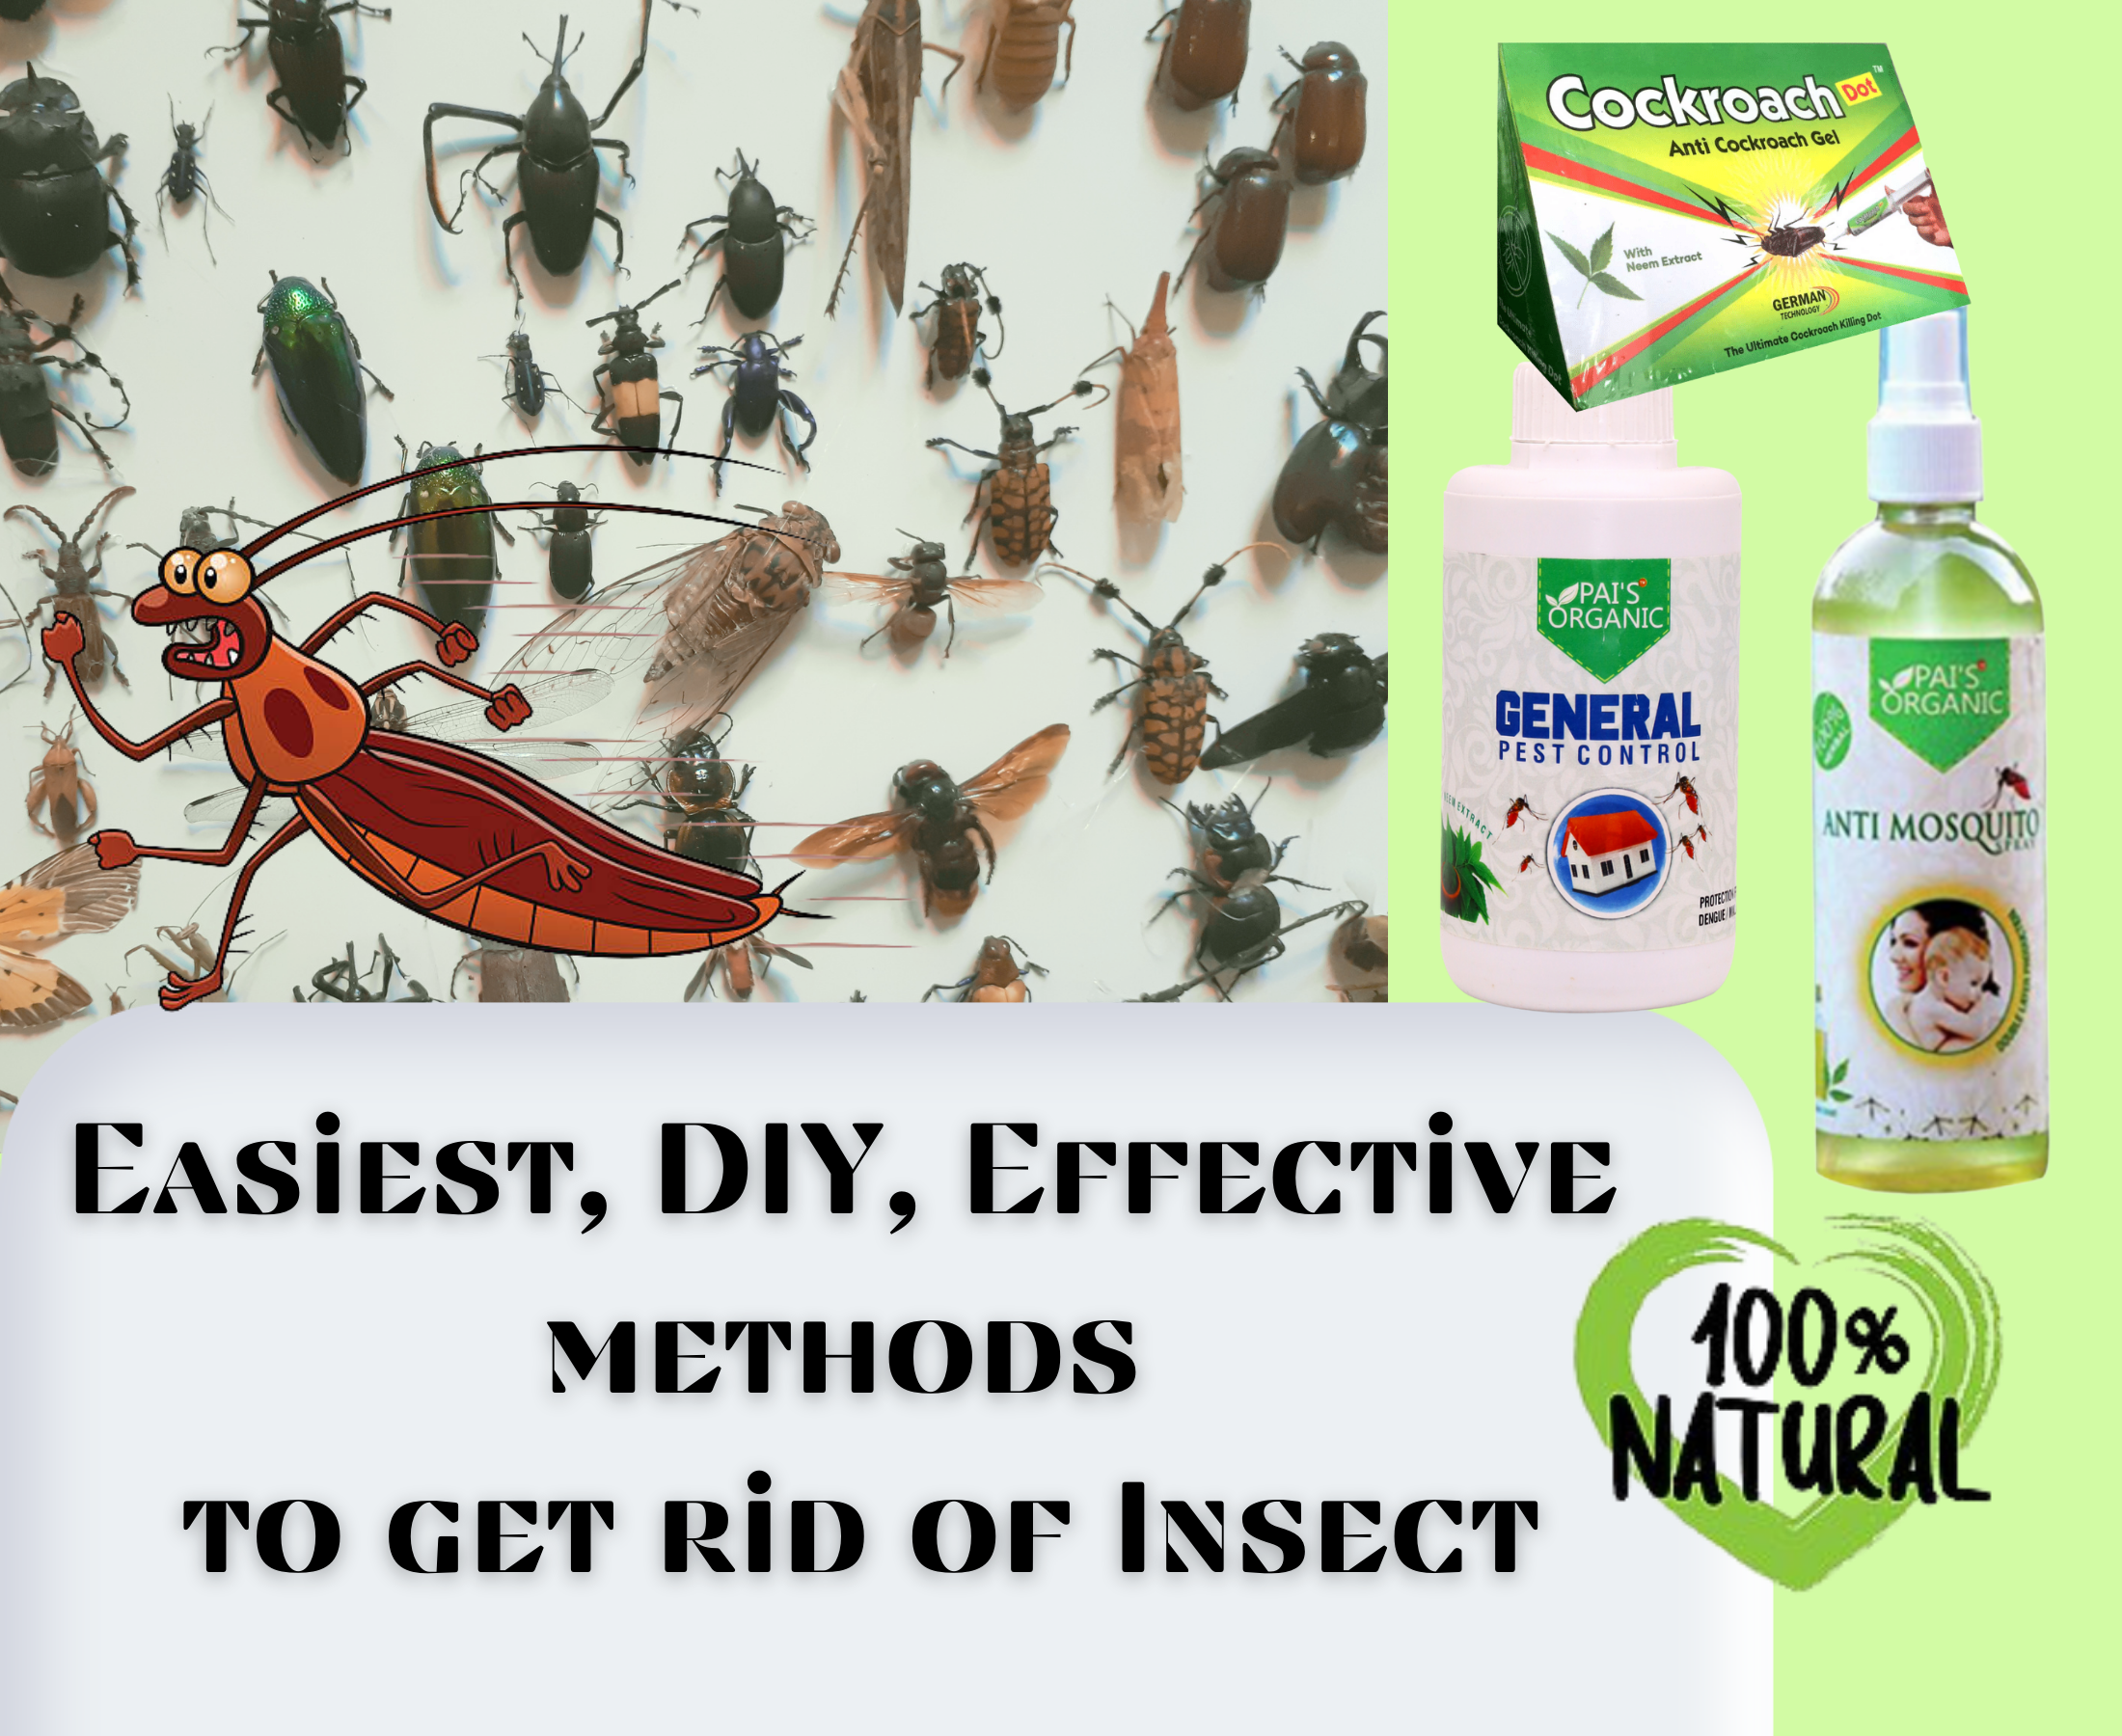 What is the best spray to control insects?